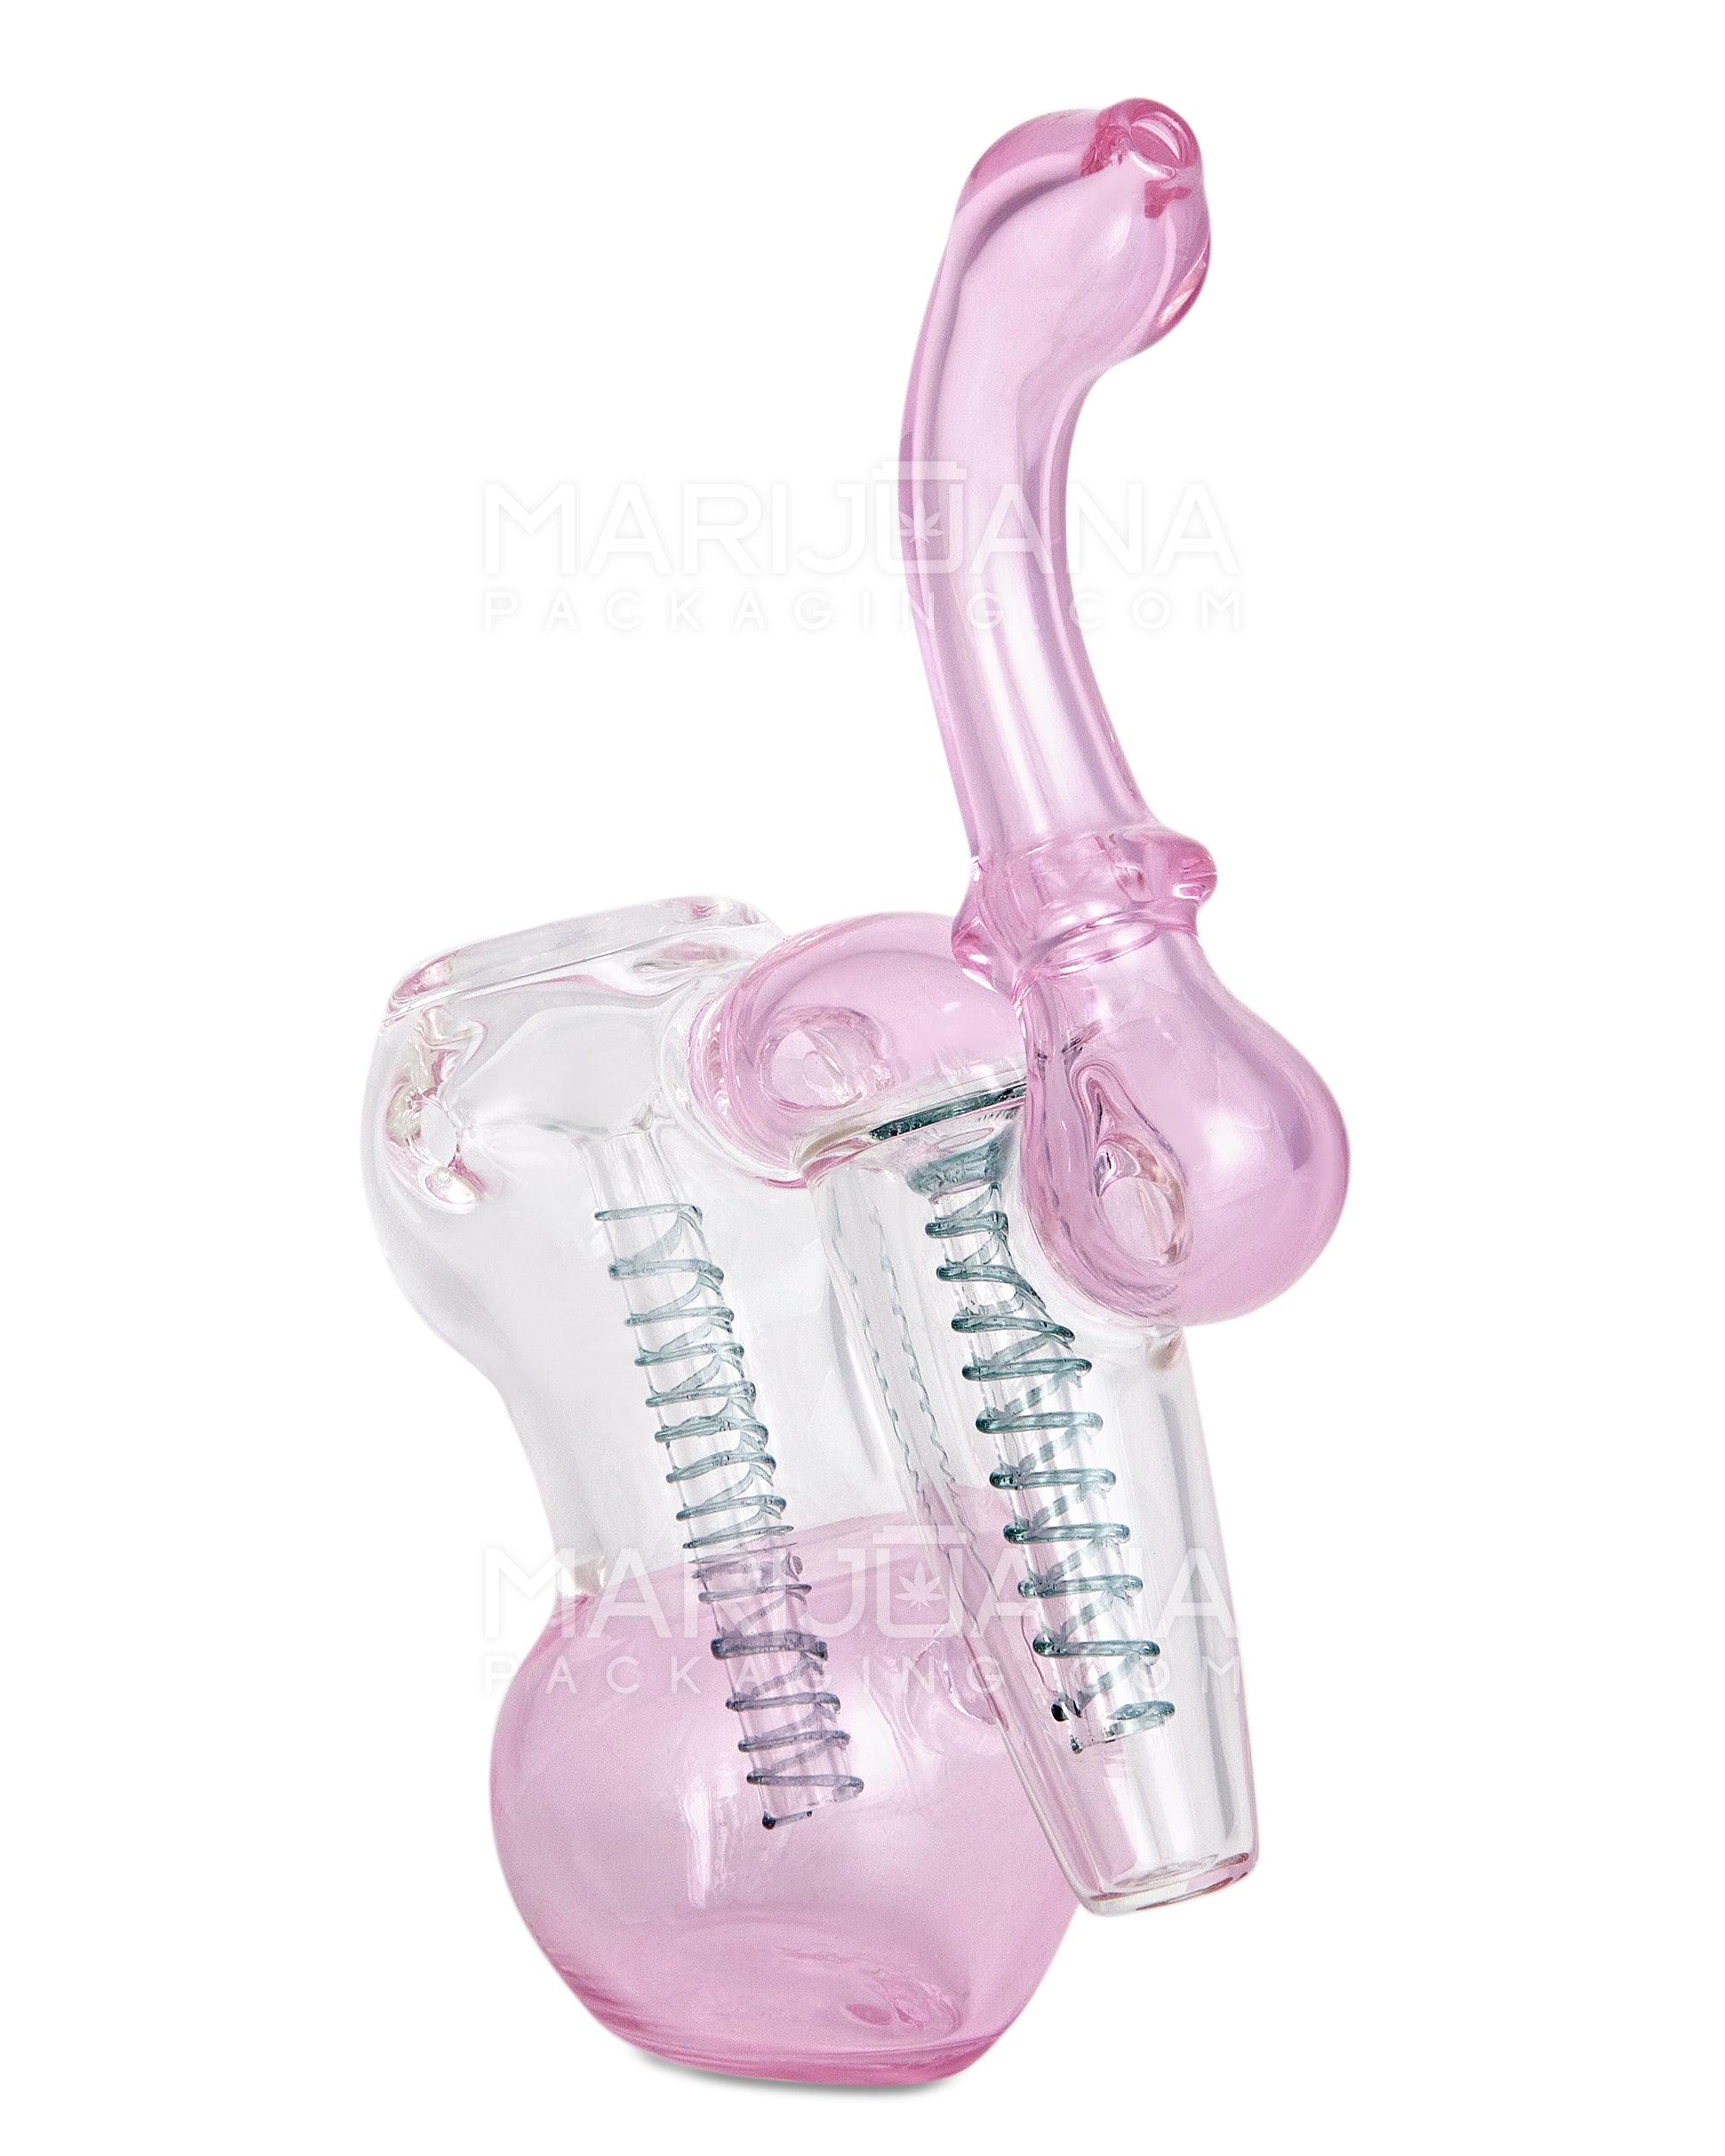 Ringed Double Chamber Bubbler w/ Multi Knockers | 7.5in Tall - Glass - Pink - 6